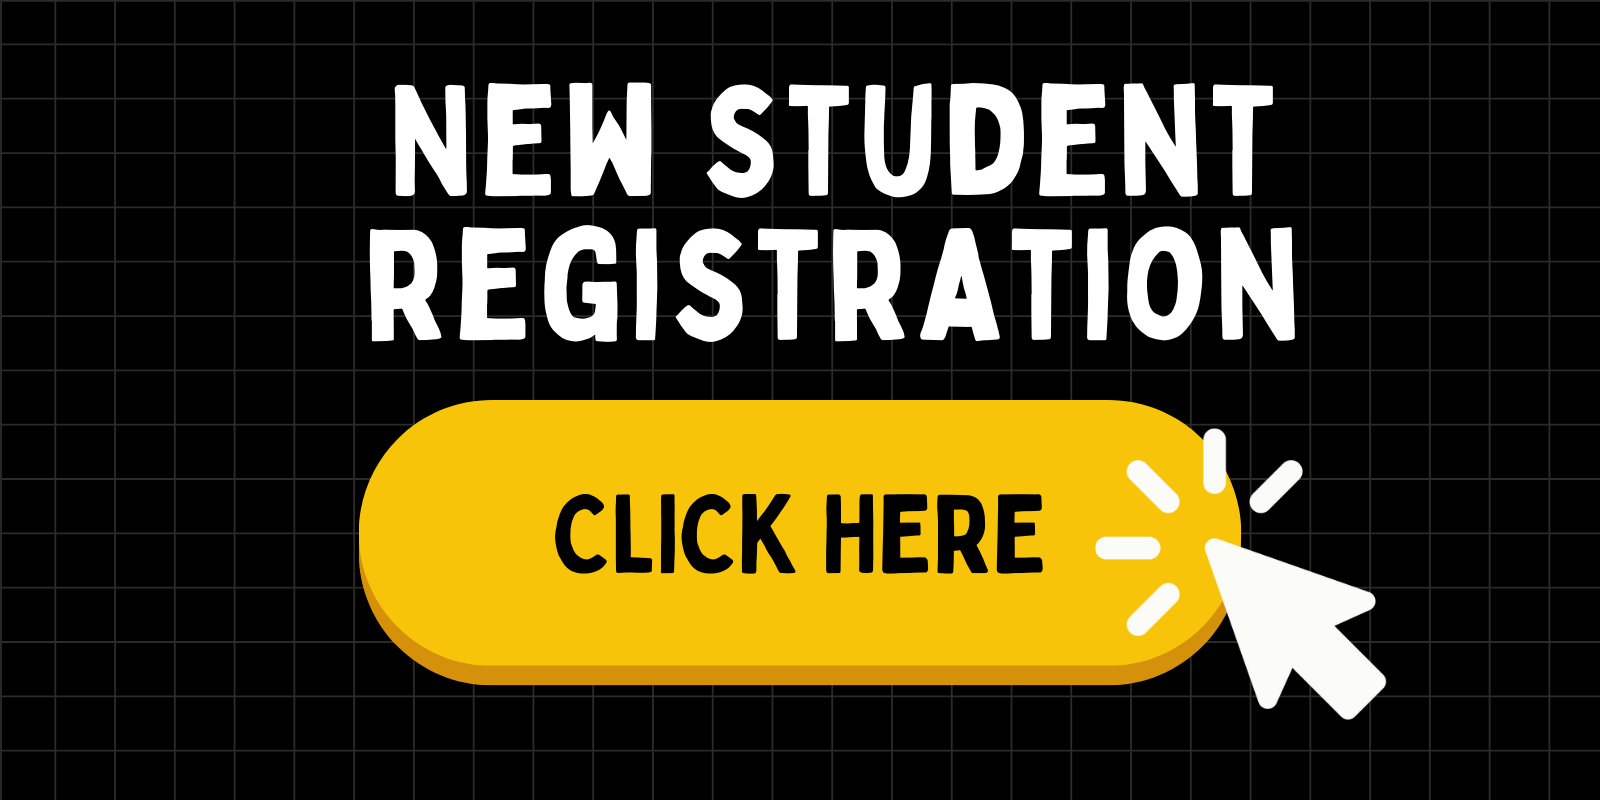 For new student registration, click here